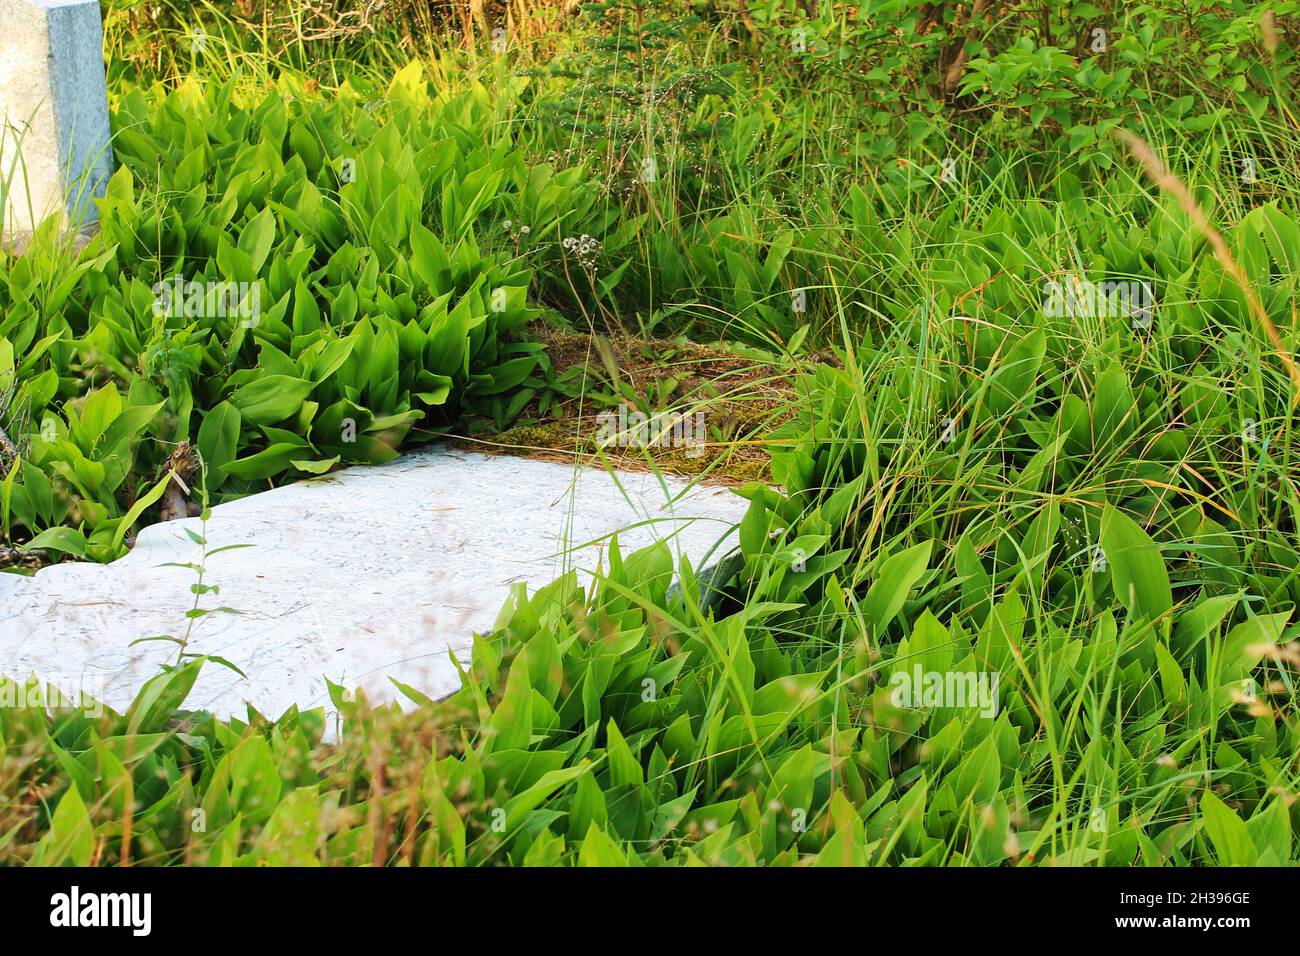 An old granite headstone in a disused cemetery, overgrown by grass and wildflowers. Stock Photo